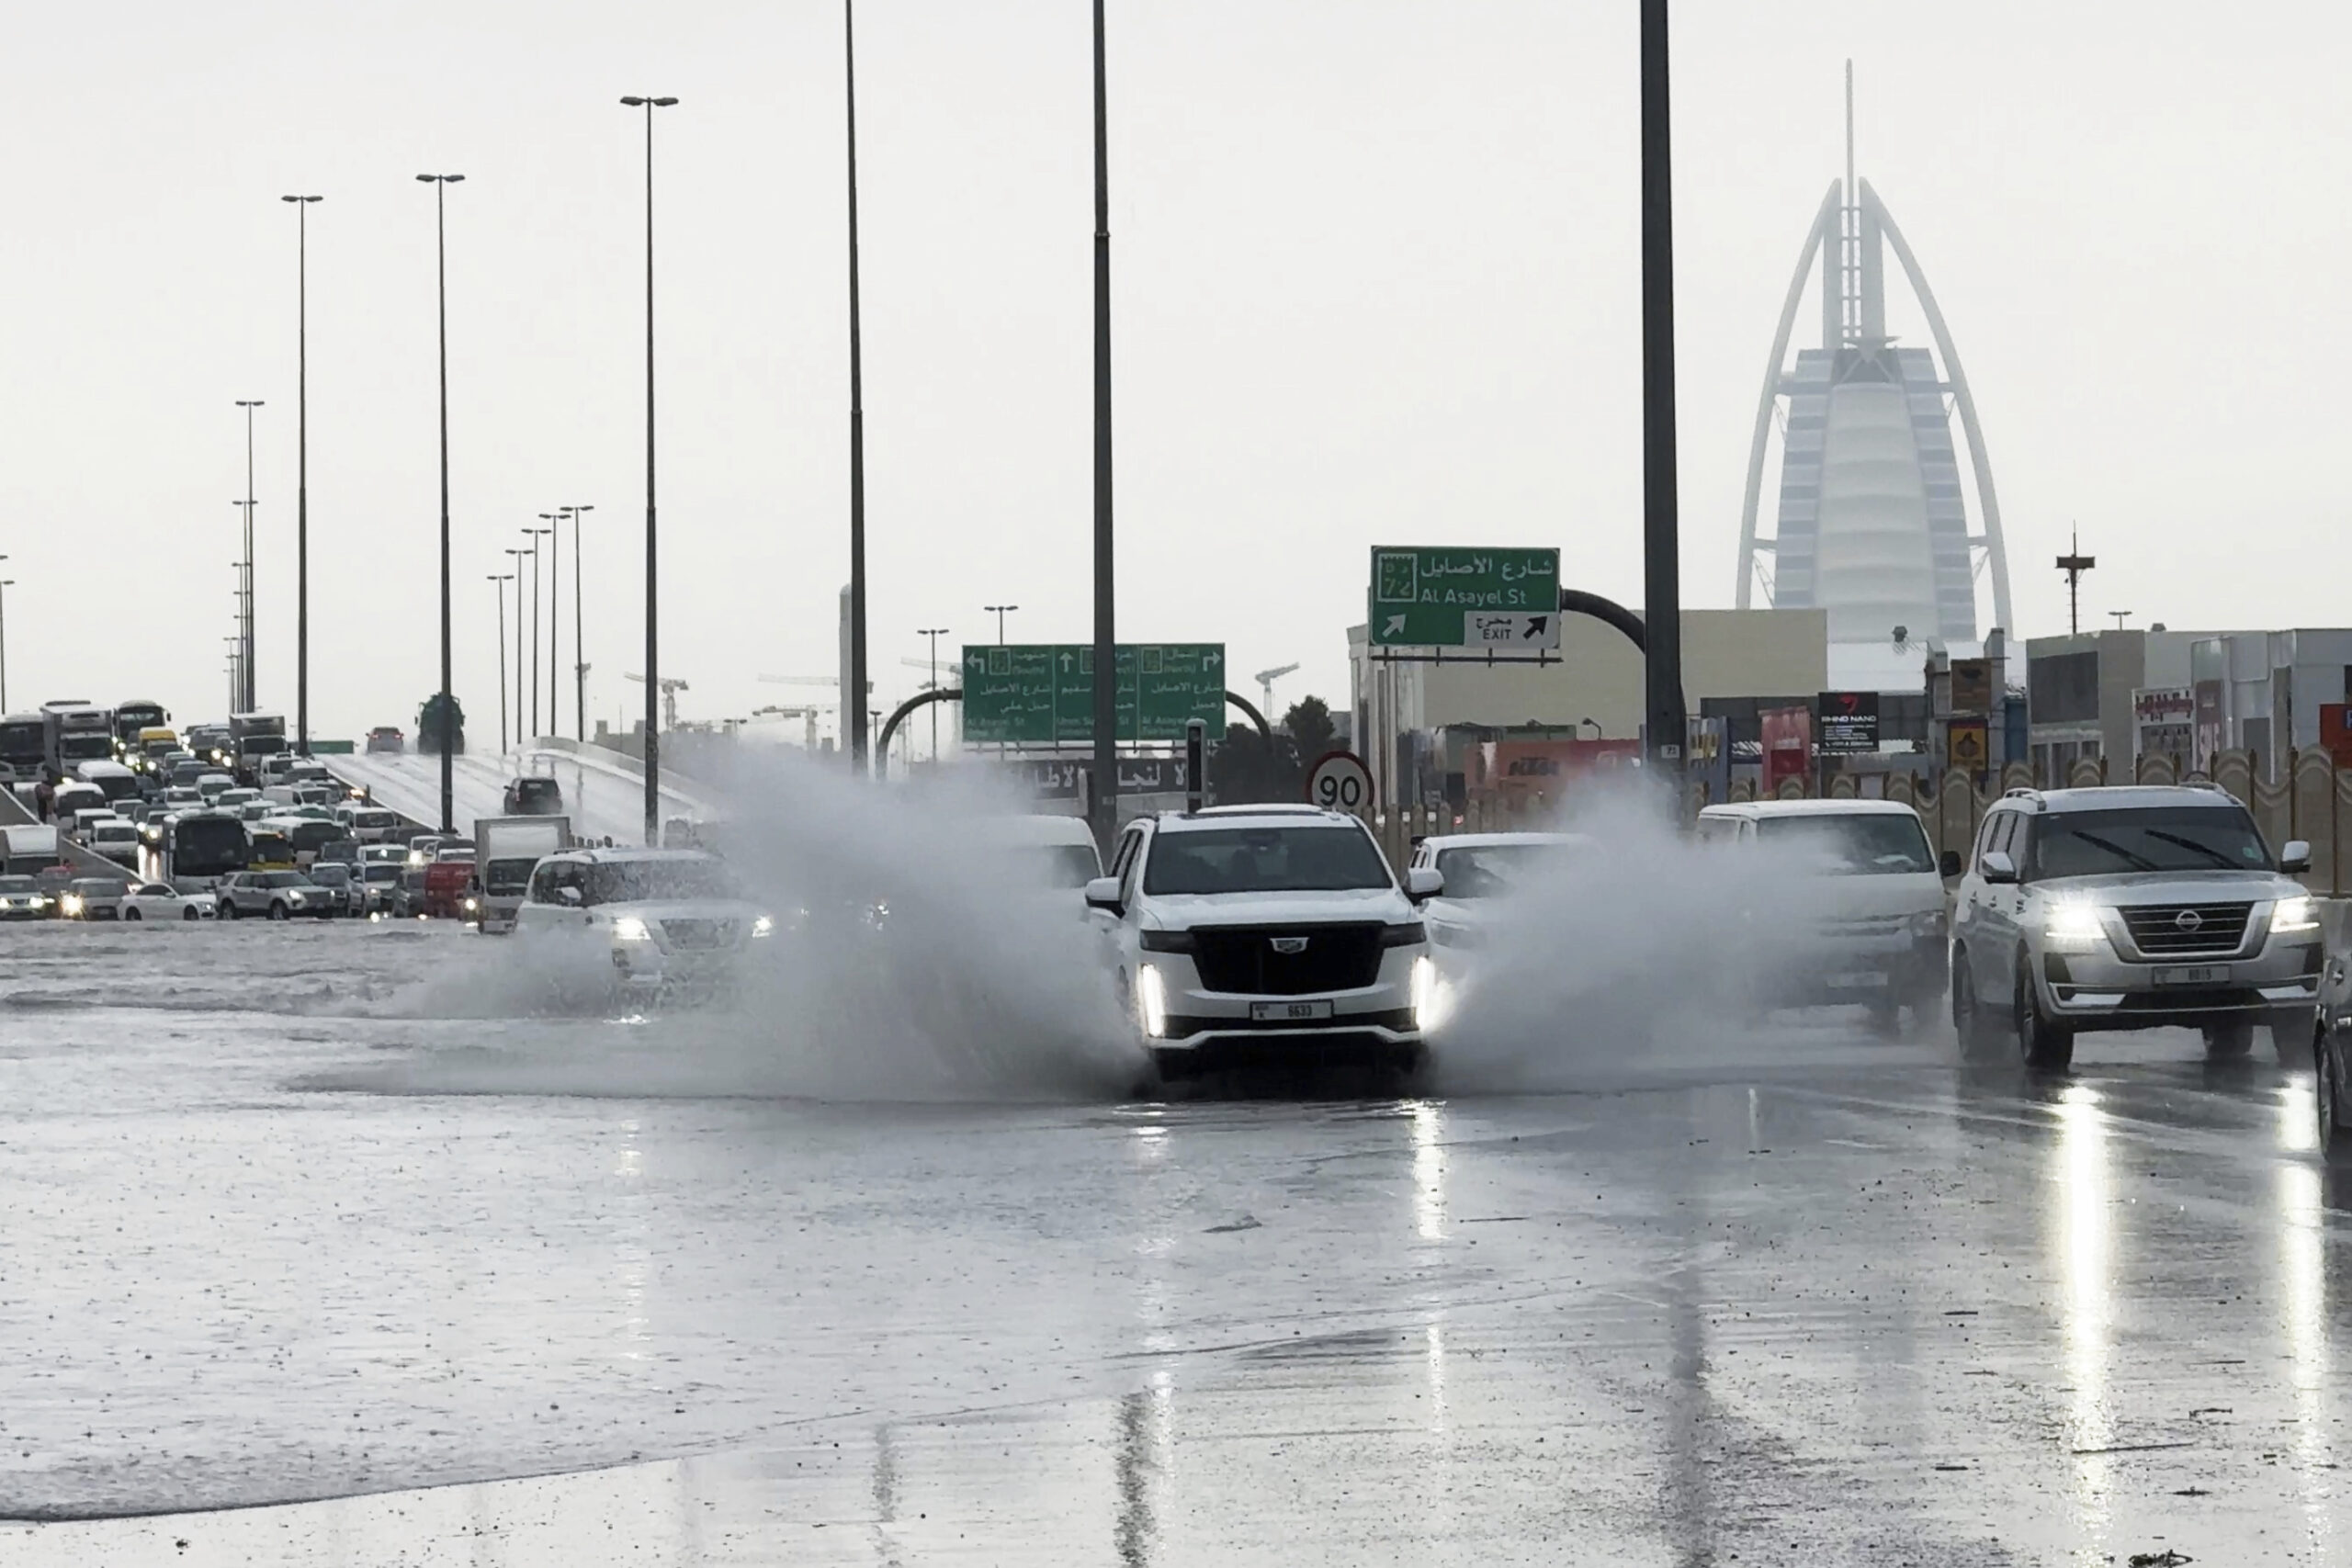 dubai airport diverts flights as ‘exceptional weather’ hits gulf